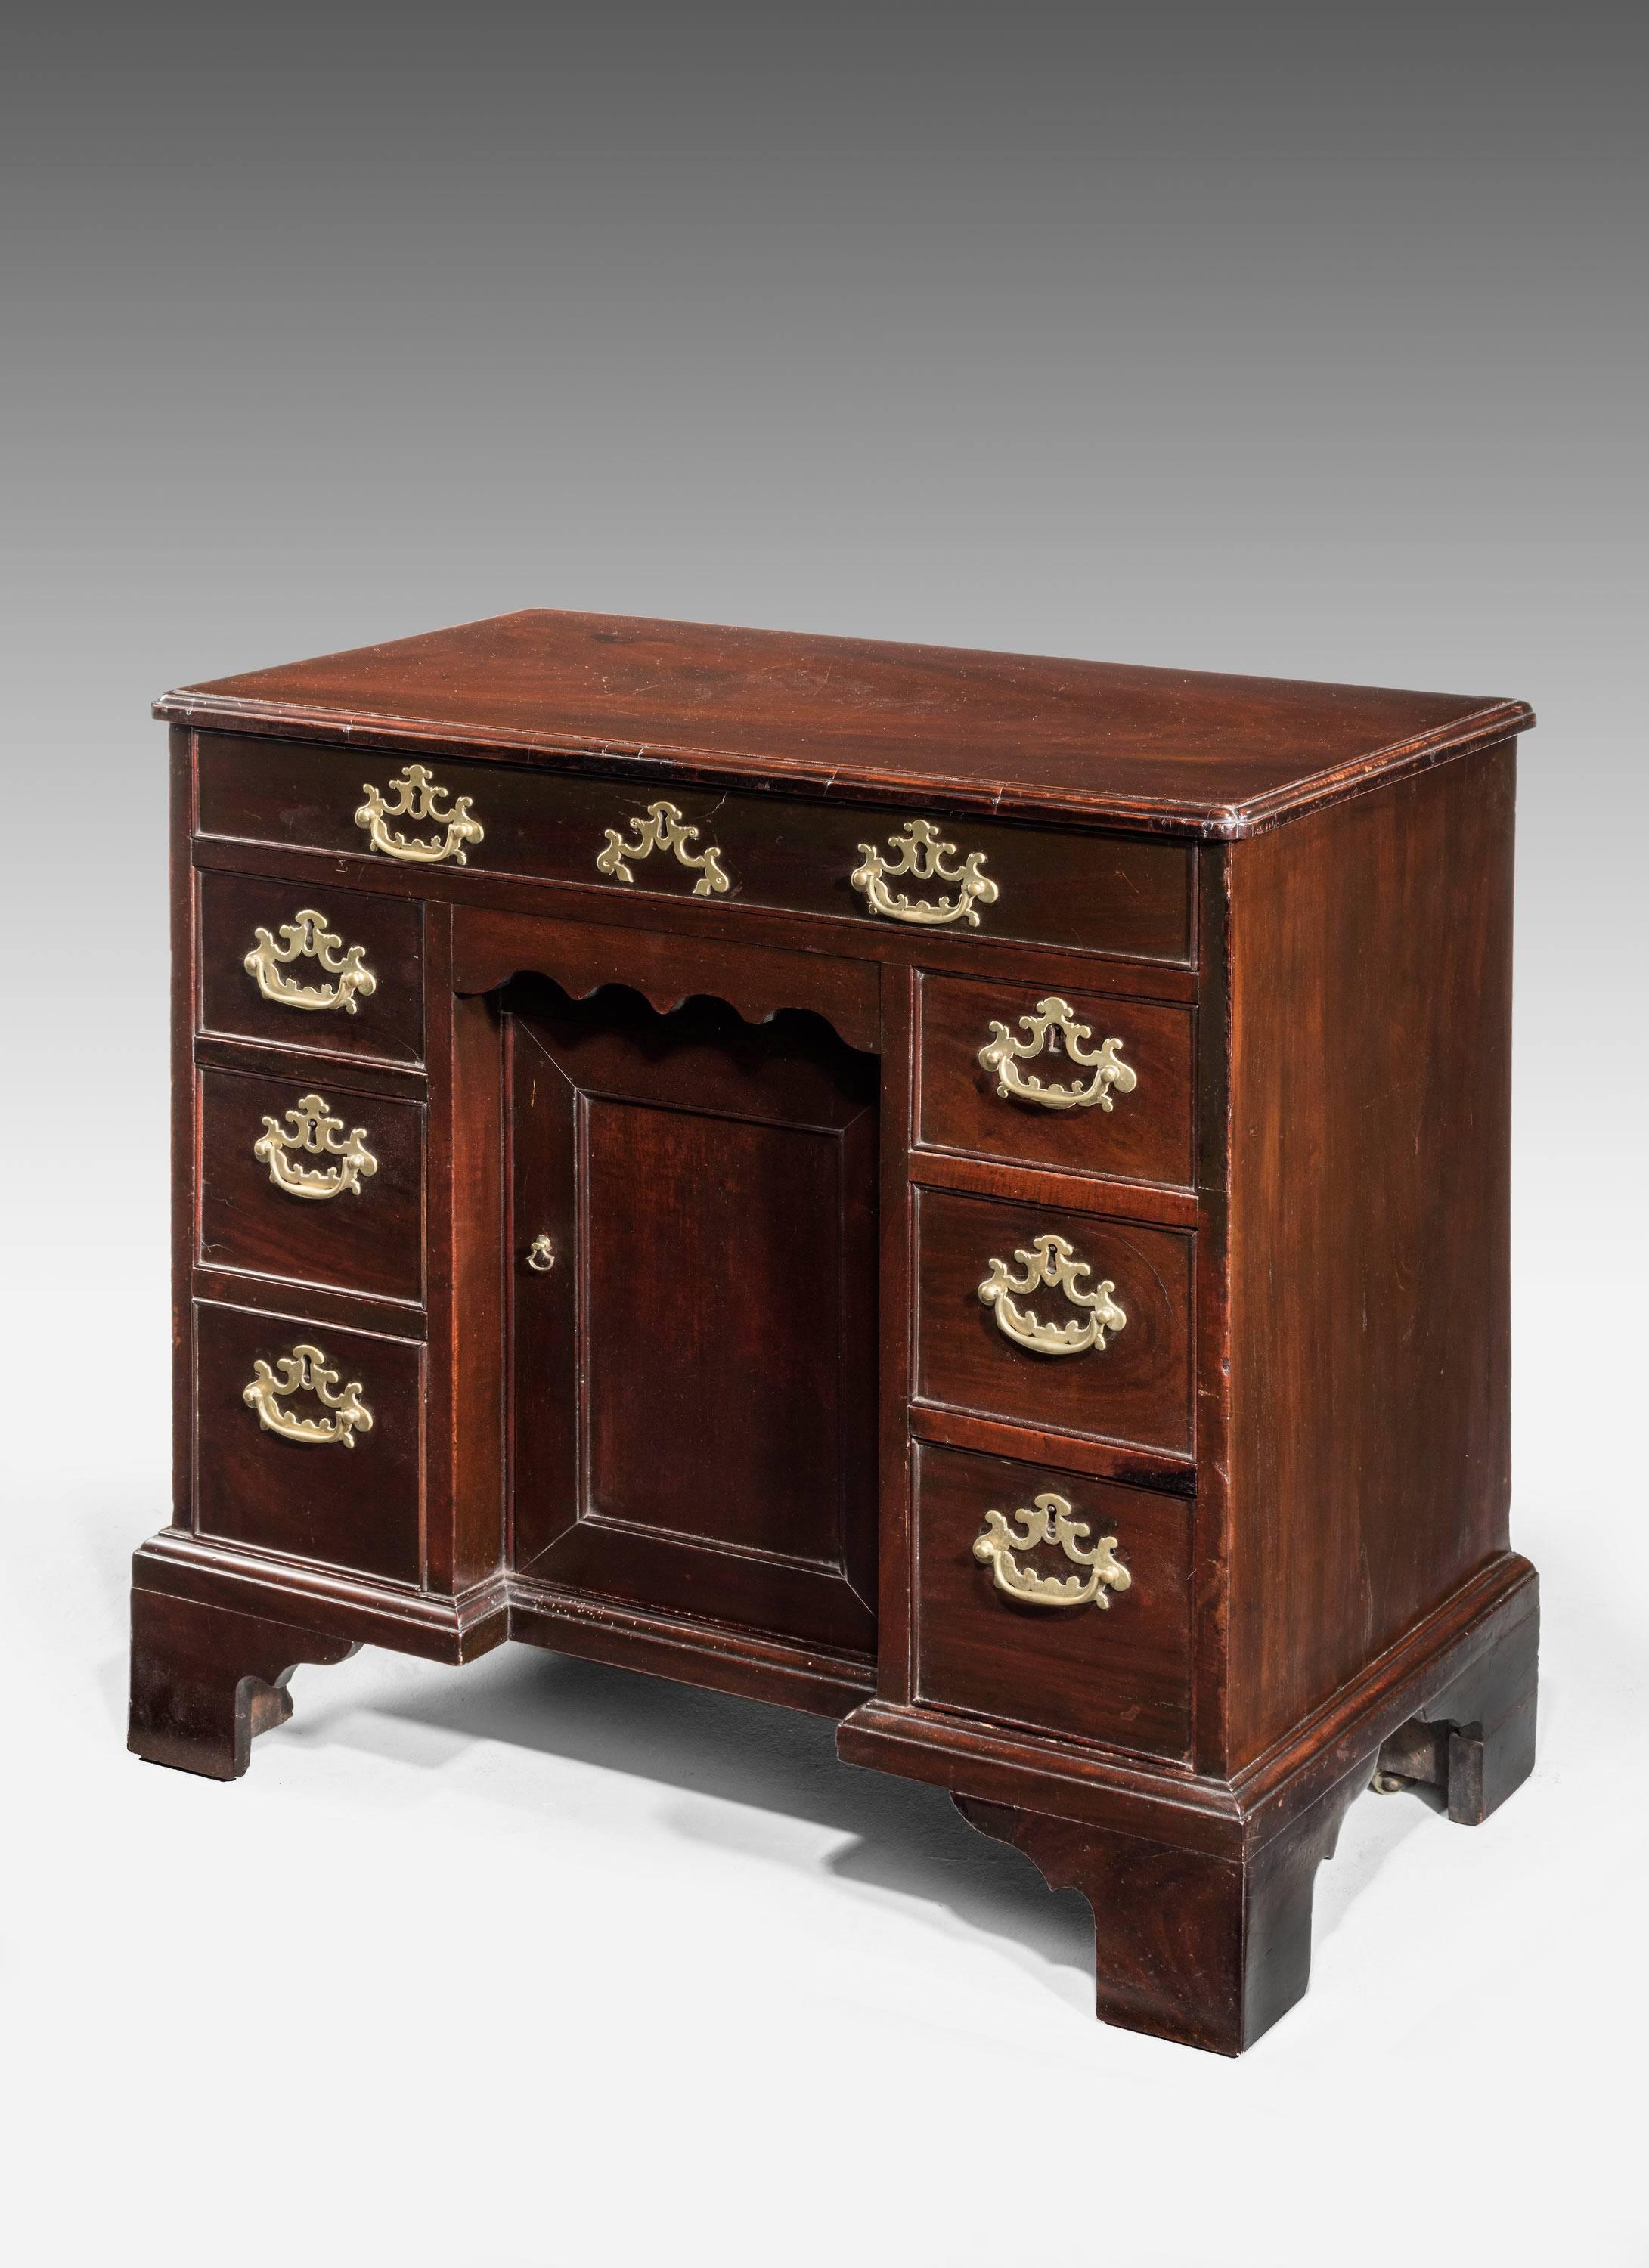 An unusually small and charming George II period kneehole desk. The cusb corners to the top over seven drawers and a centre cupboard. With original period bracket feet. Lovely pierced brass work. The whole very well formed and of excellent